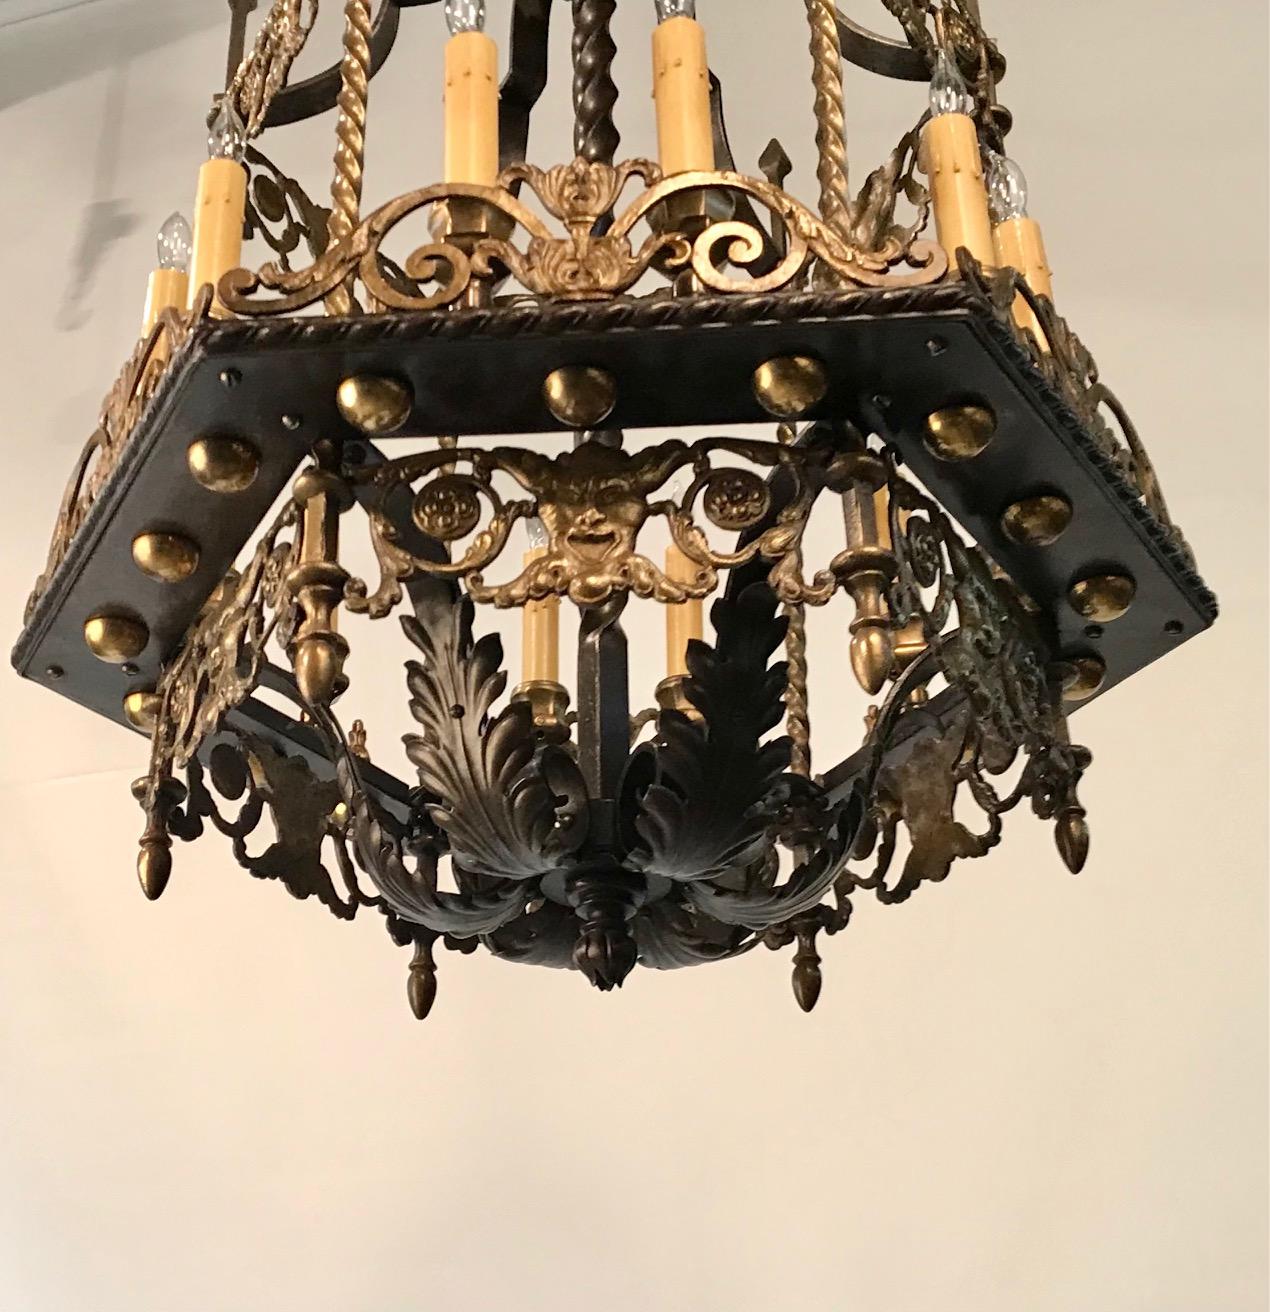 An Antique 12 Light Neo-Renaissance  Bronze and Wrought Iron Chandelier For Sale 2